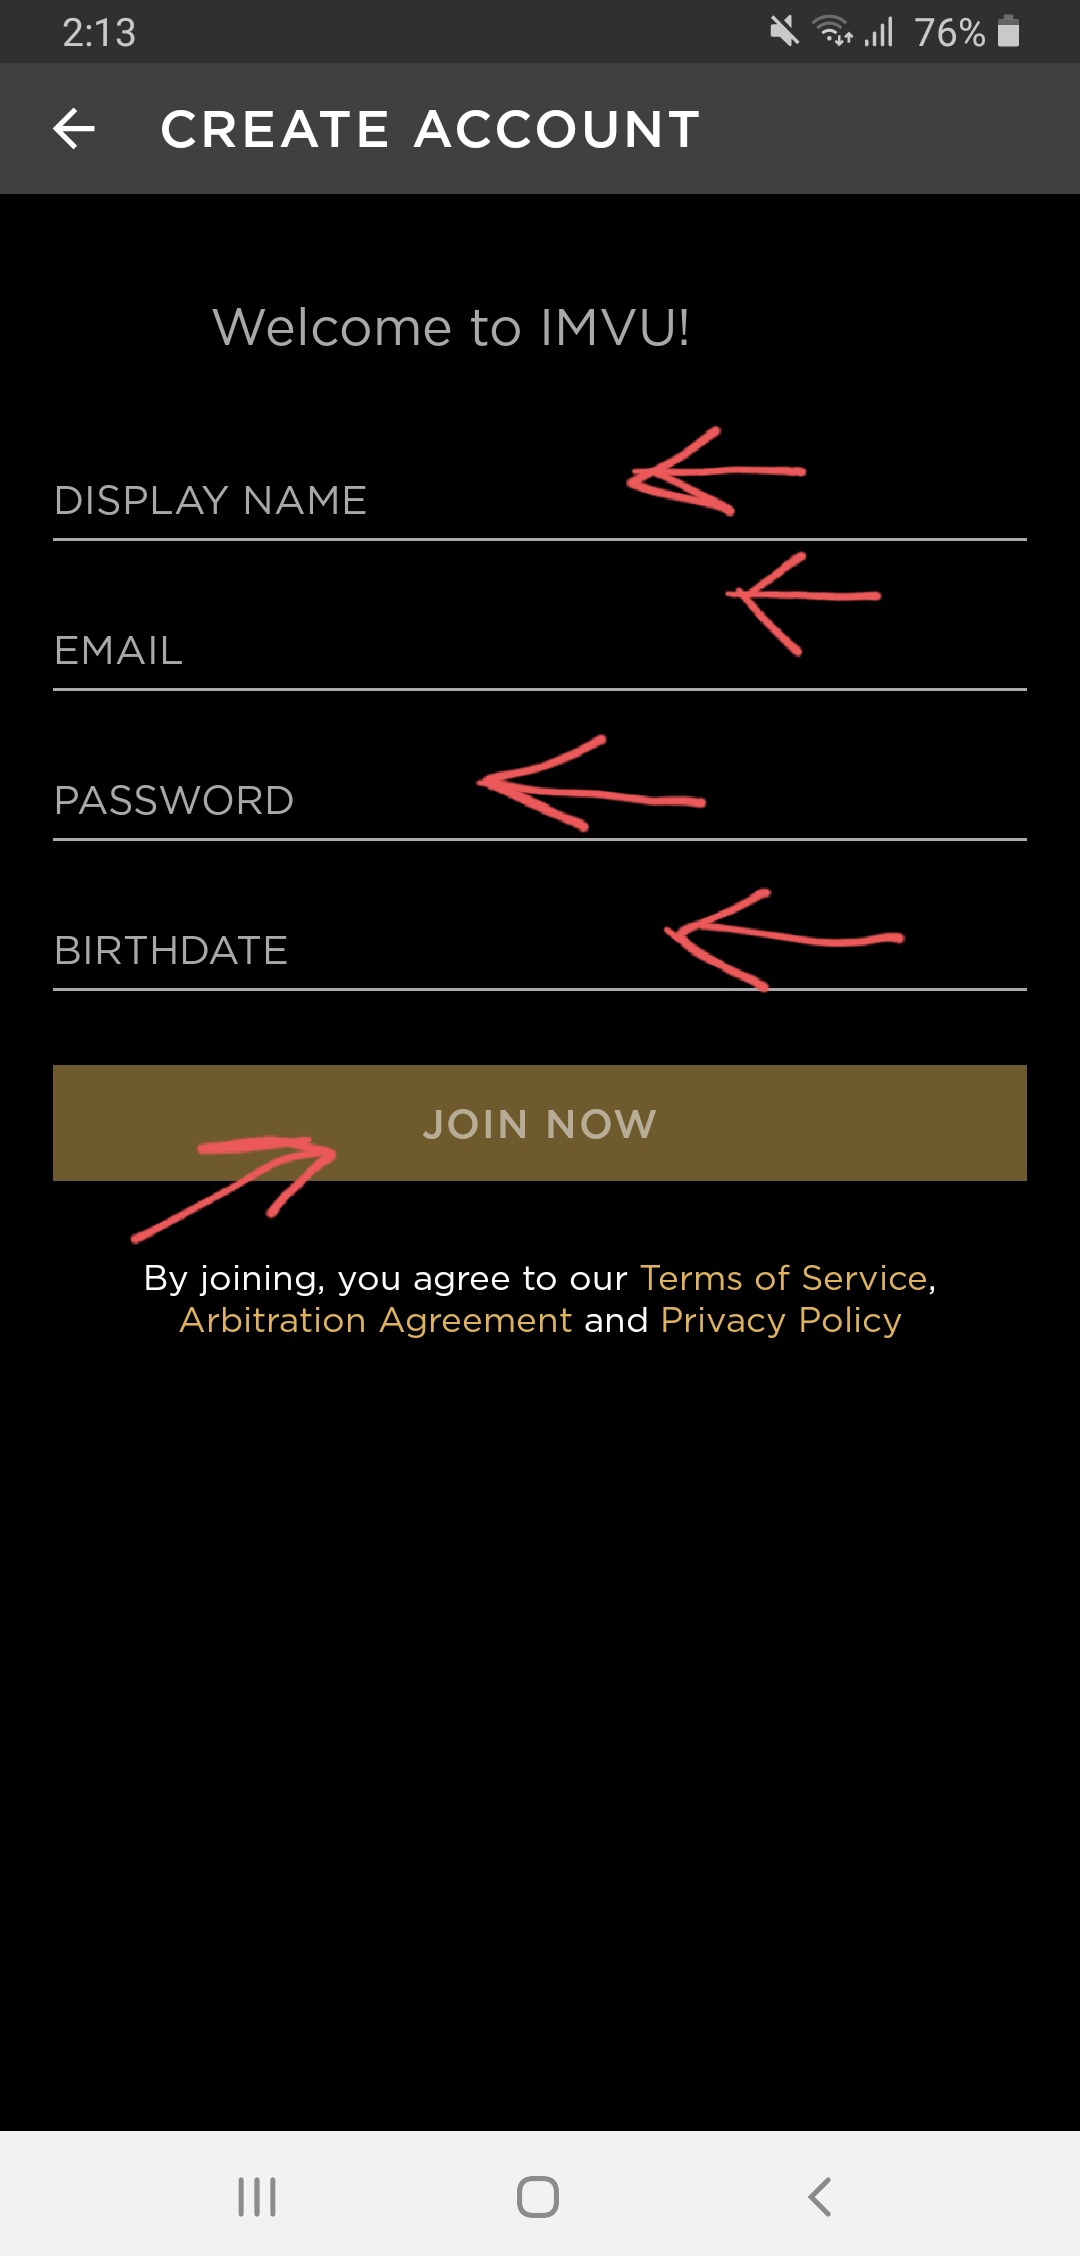 Fill in your name, email, password and birthday